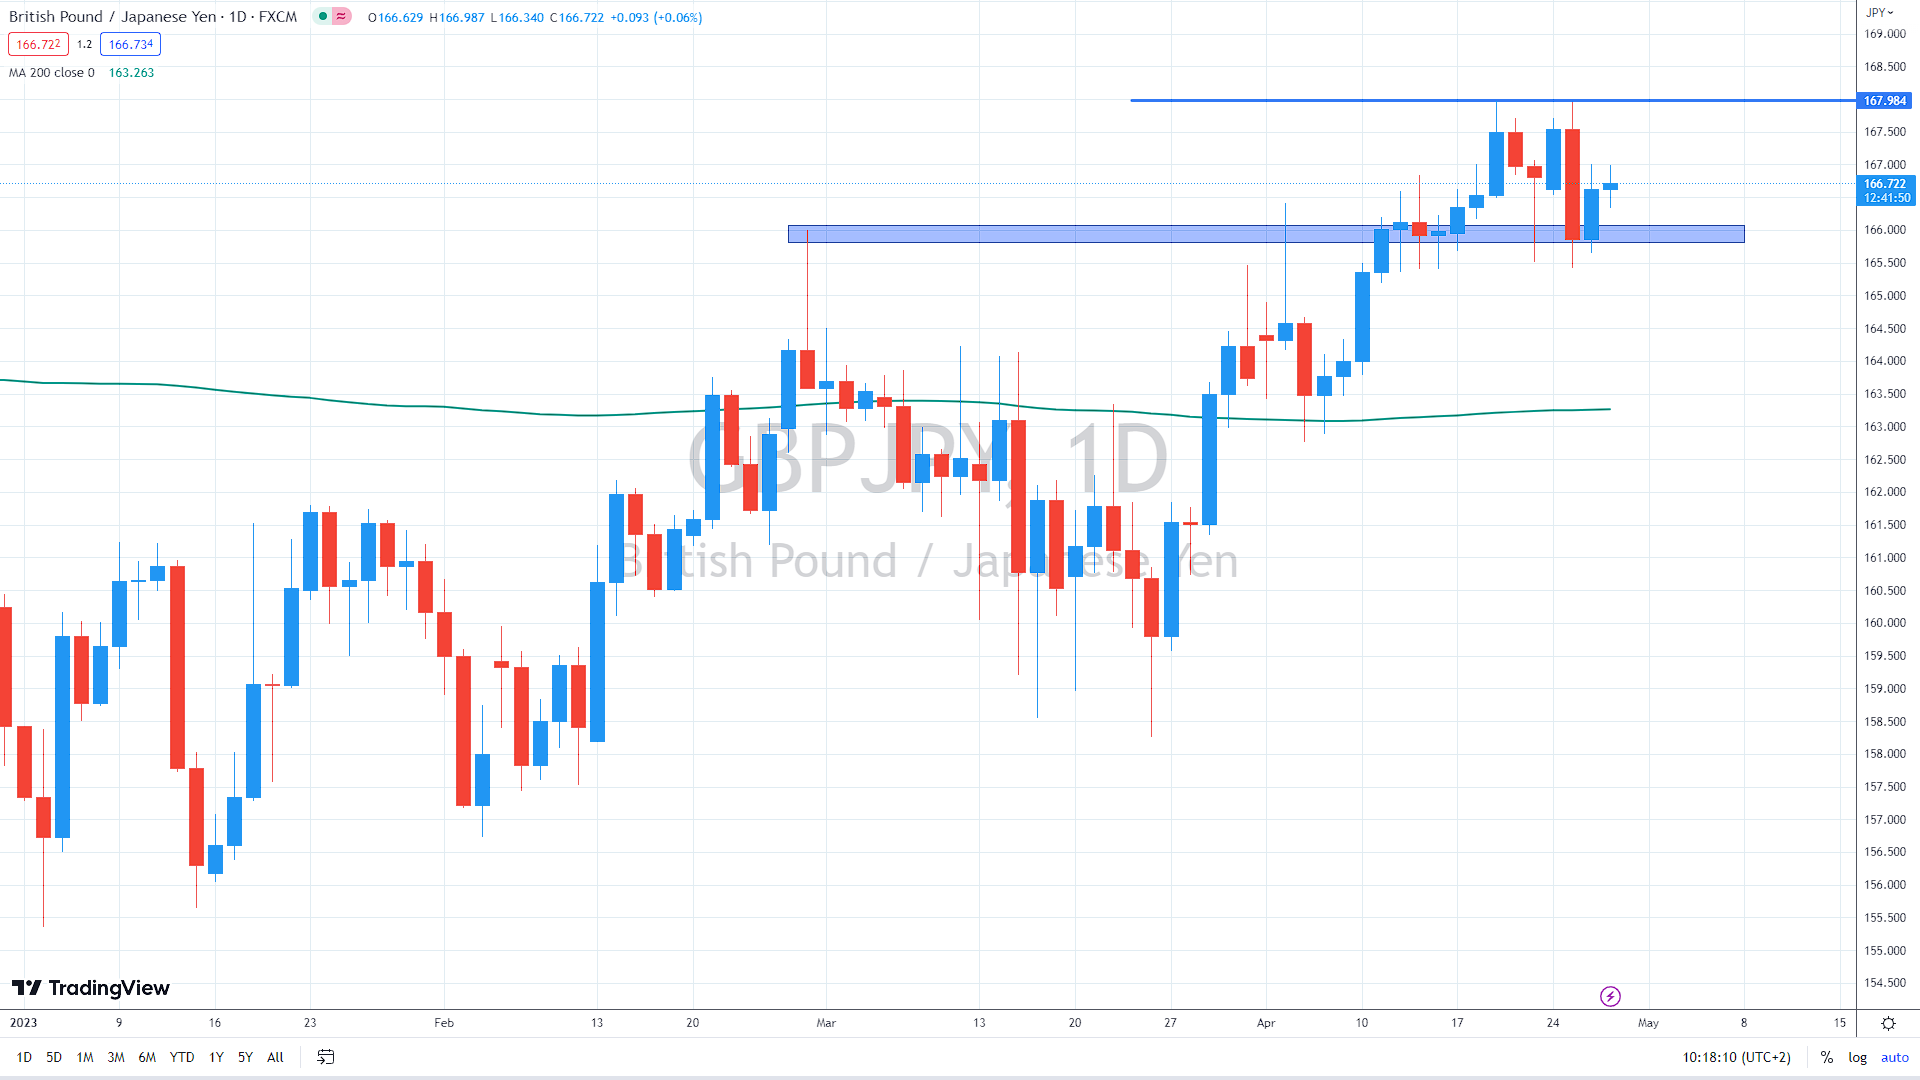 GBP/JPY daily chart